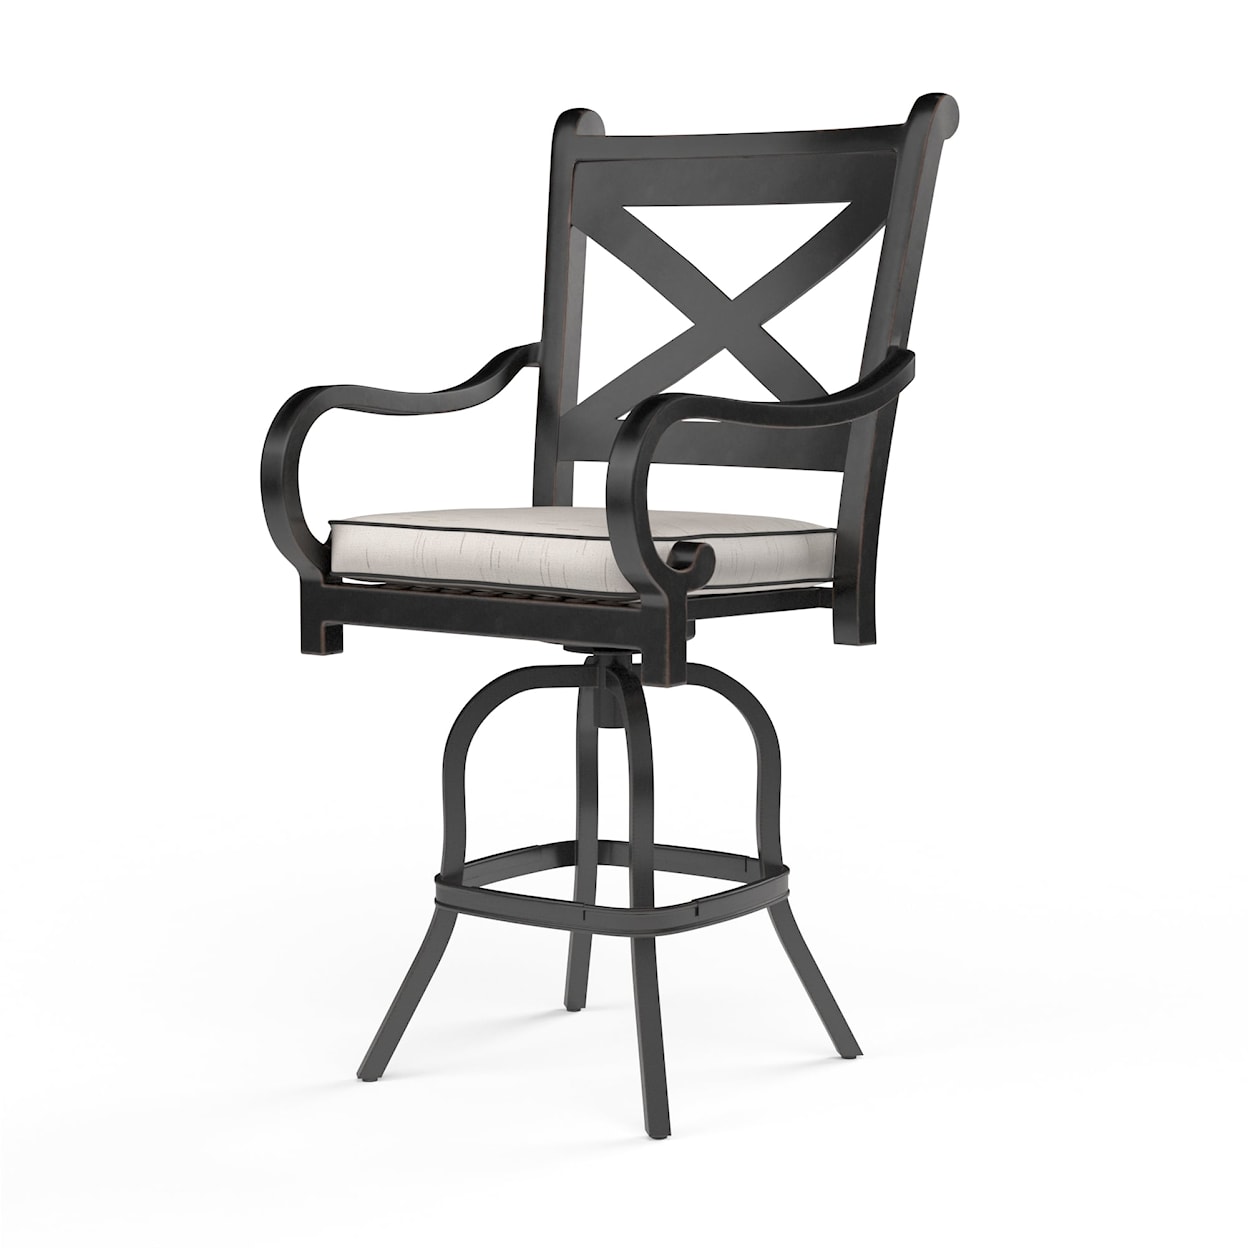 Sunset West Monterey Upholstered Dining Chair